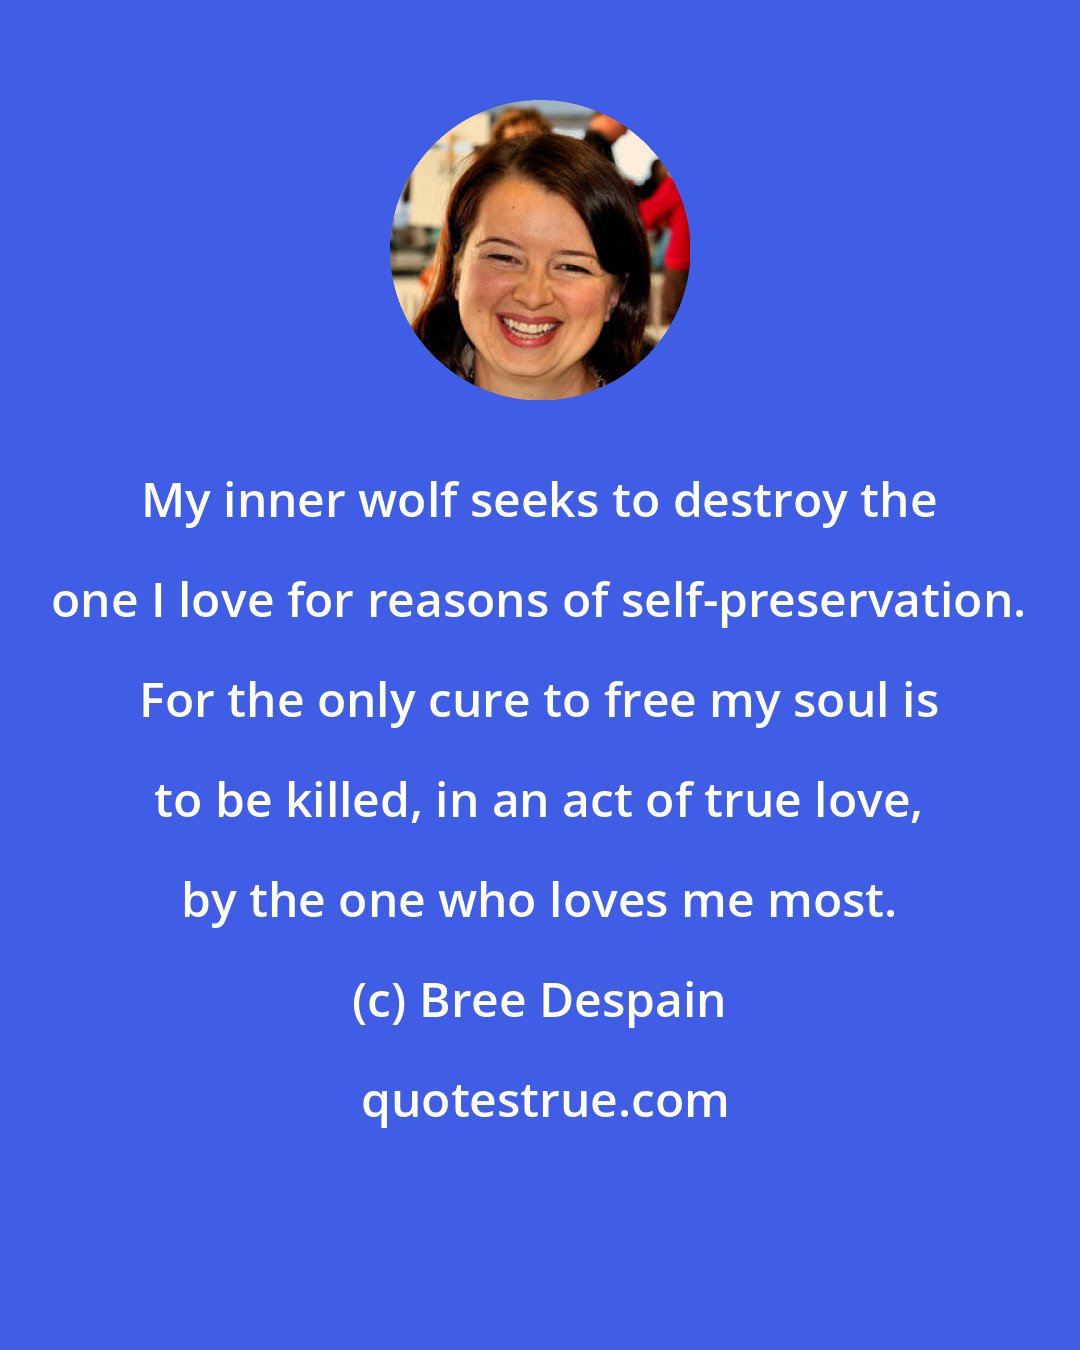 Bree Despain: My inner wolf seeks to destroy the one I love for reasons of self-preservation. For the only cure to free my soul is to be killed, in an act of true love, by the one who loves me most.